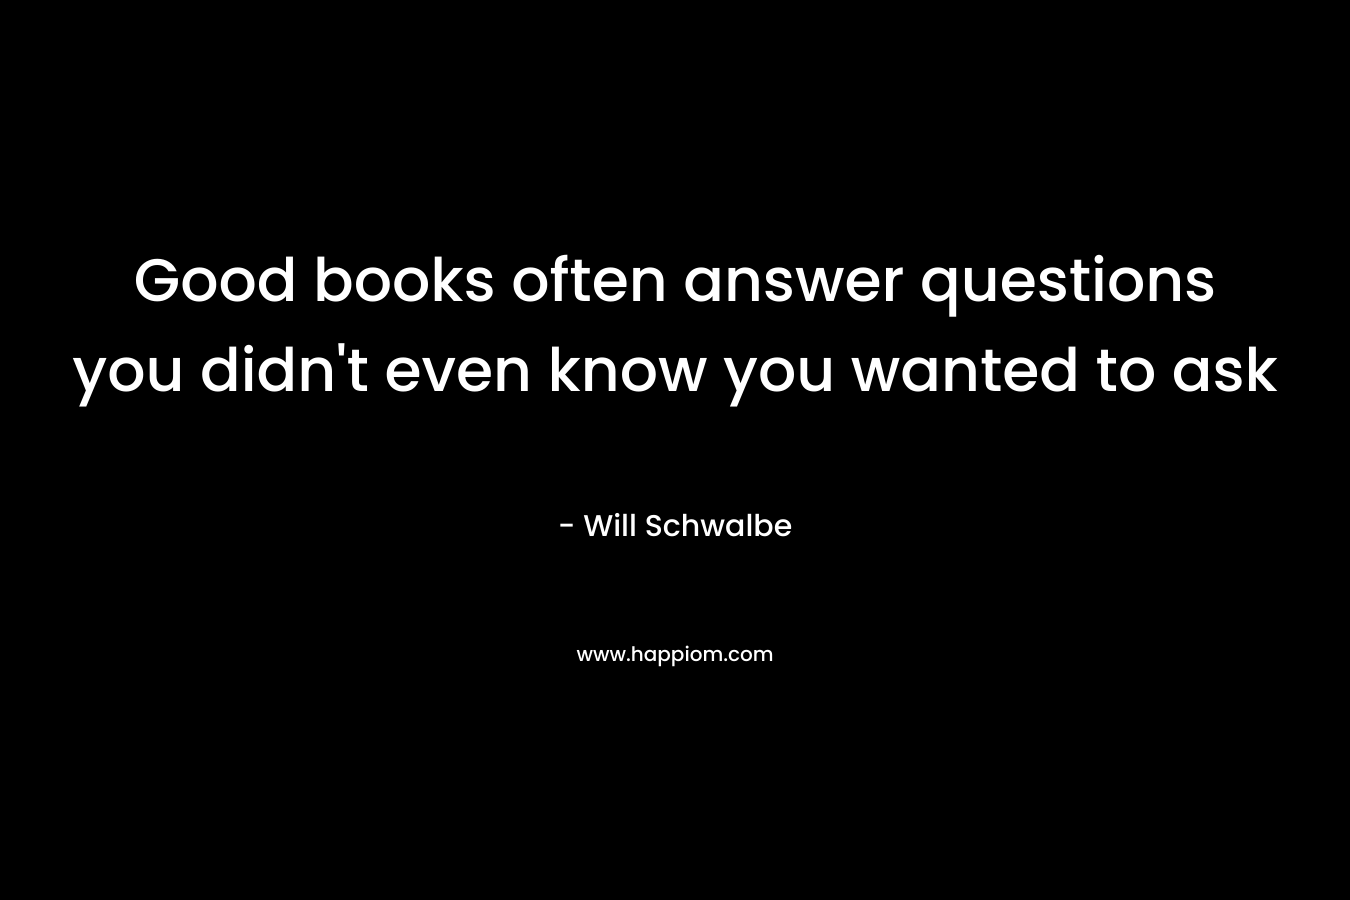 Good books often answer questions you didn't even know you wanted to ask